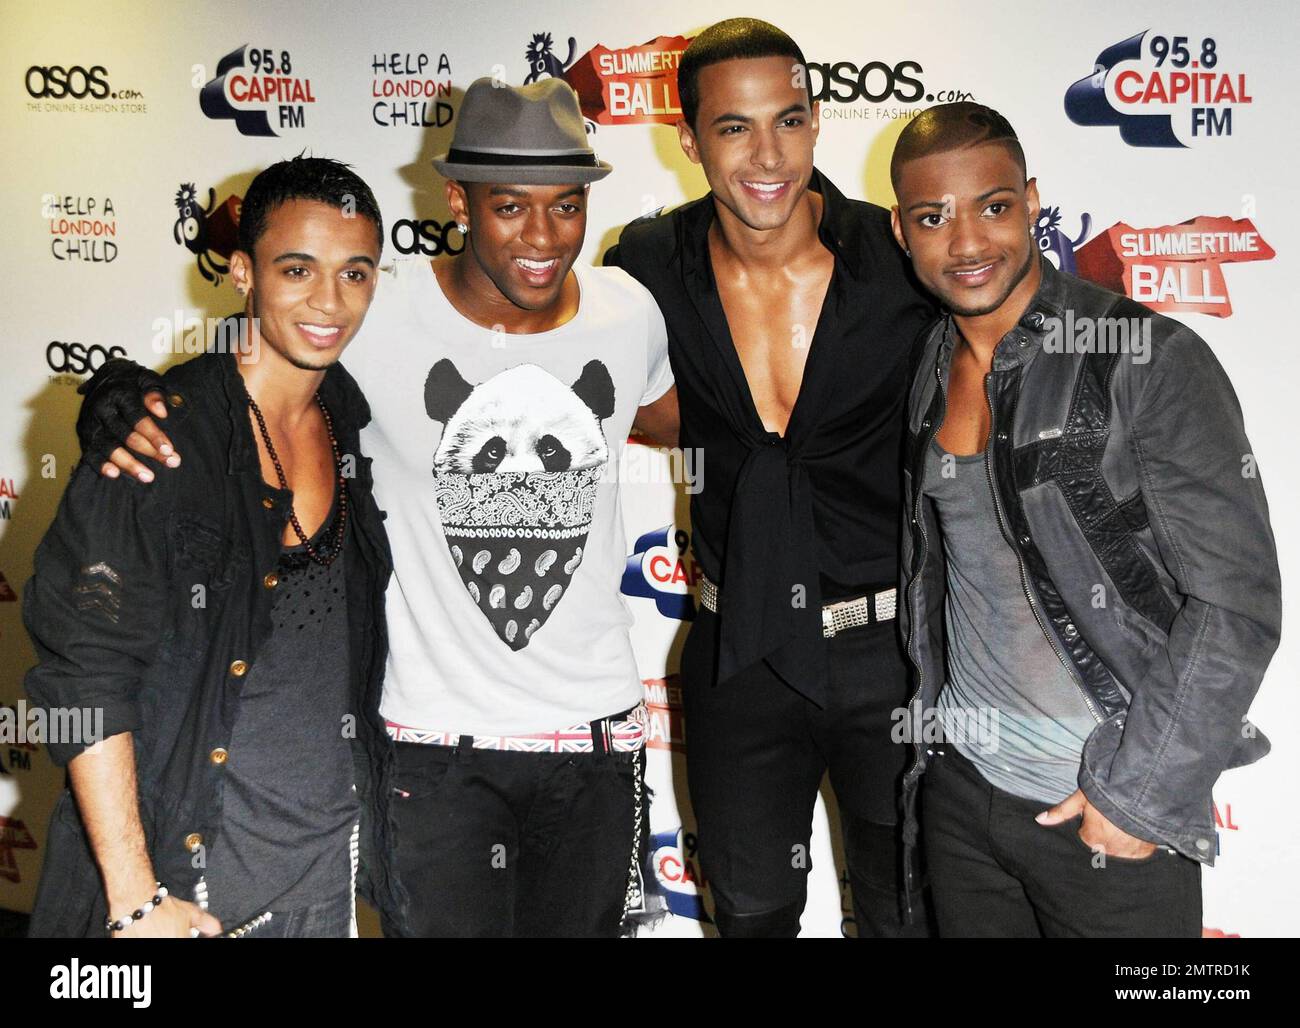 Aston Merrygold, Marvin Humes, Jonathan 'JB' Gill and Oritse Williams of the British boyband JLS (Jack the Lad Swing) arrive at Summertime Ball 2010, presented by 95.8 Capital FM radio, held at Wembley Stadium.  The 2010 Ball marks the second year 95.8 Capital FM radio has hosted the pop concert of which a portion of ticket sales profit is donated to the 95.8 Capital FM charity 'Help a London Child'.  London, UK. 06/06/10. Stock Photo